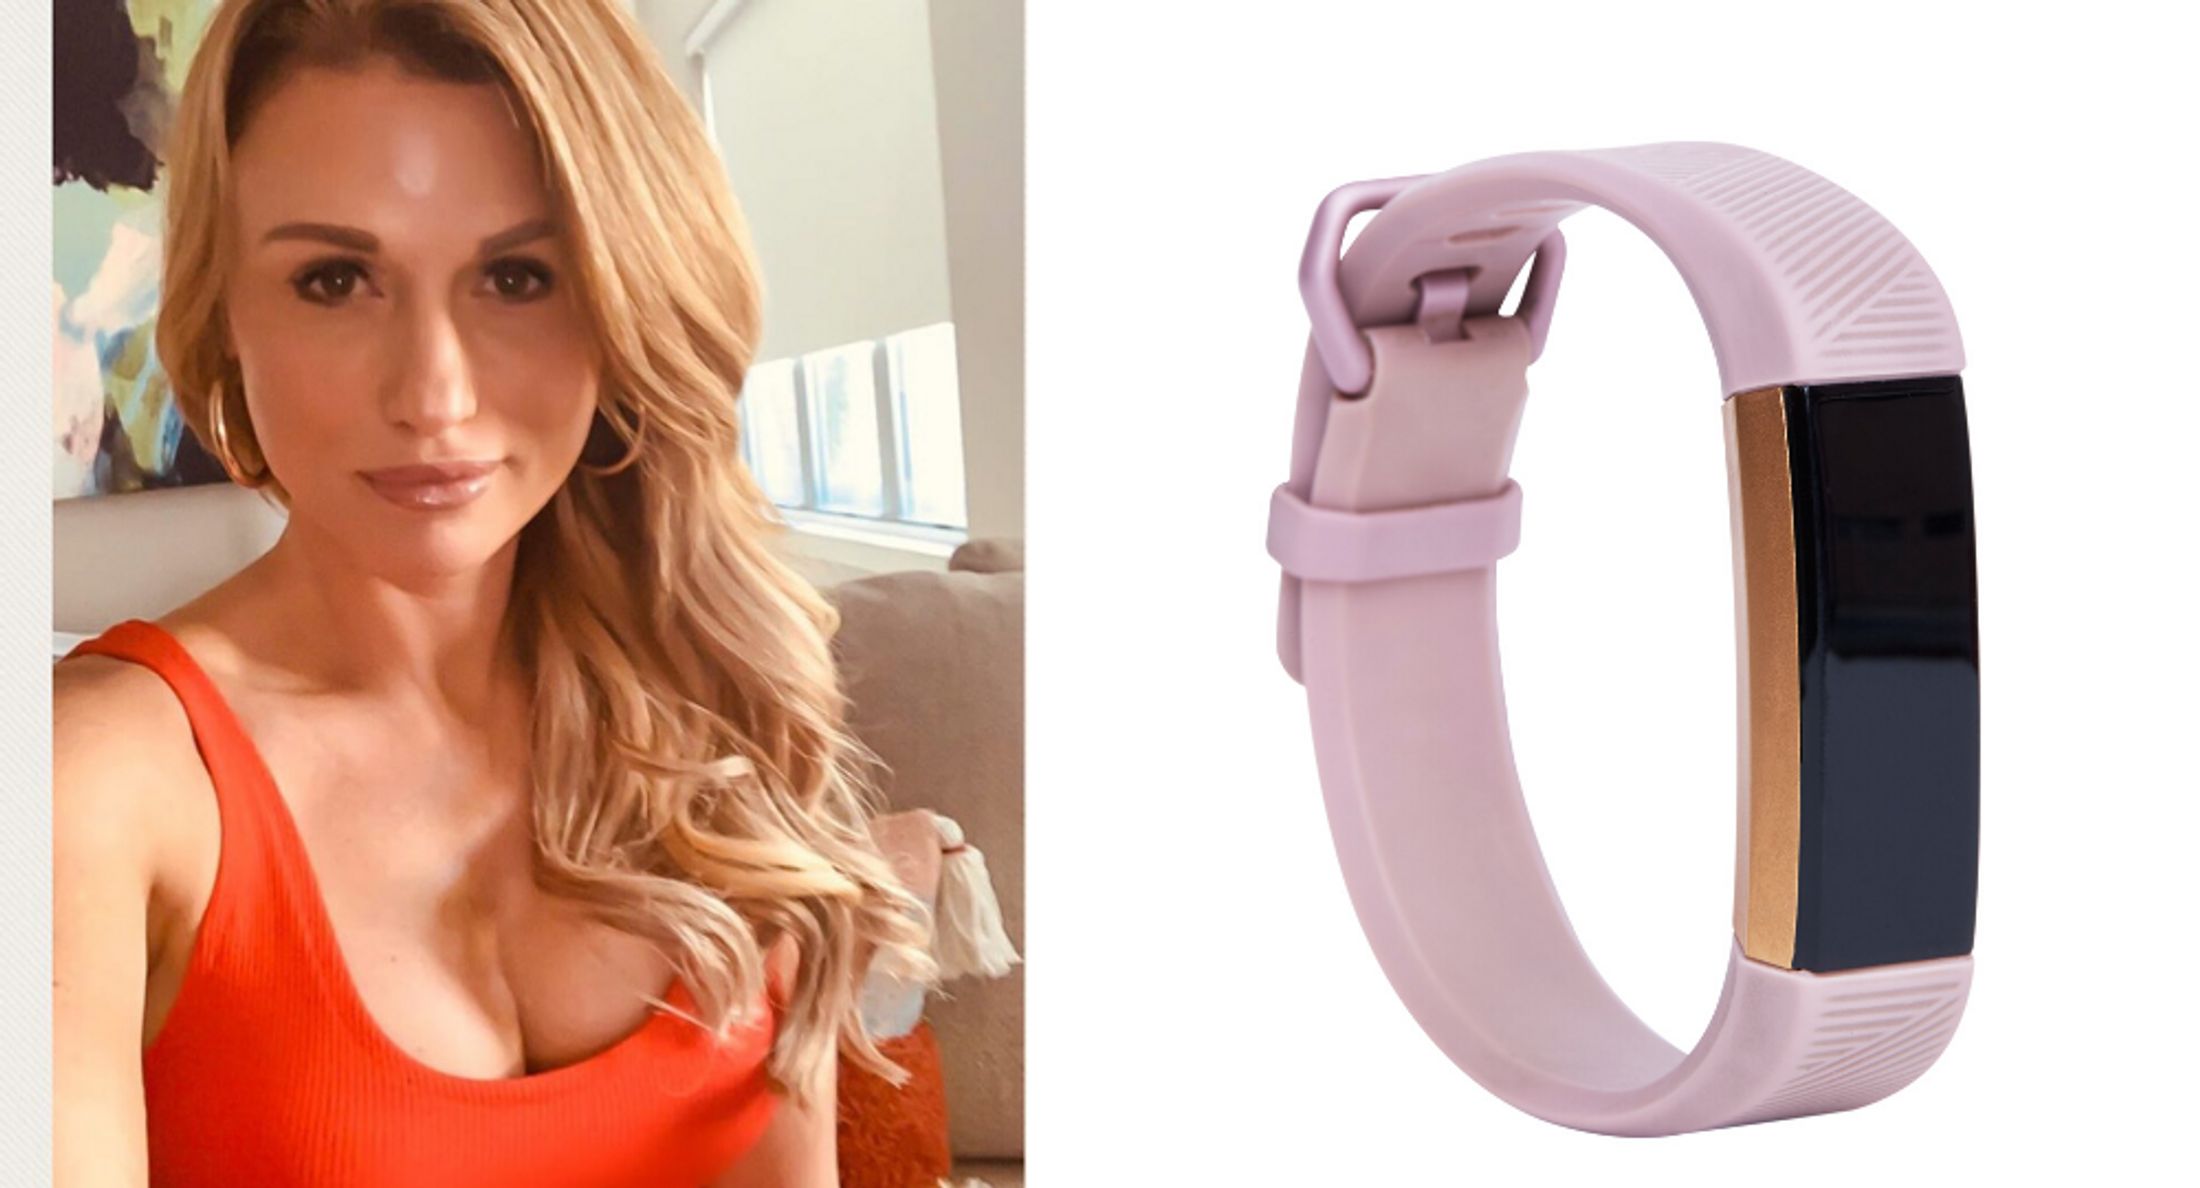 When Jane Slater’s boyfriend gave her a Fitbit watch for Christmas, to trac...